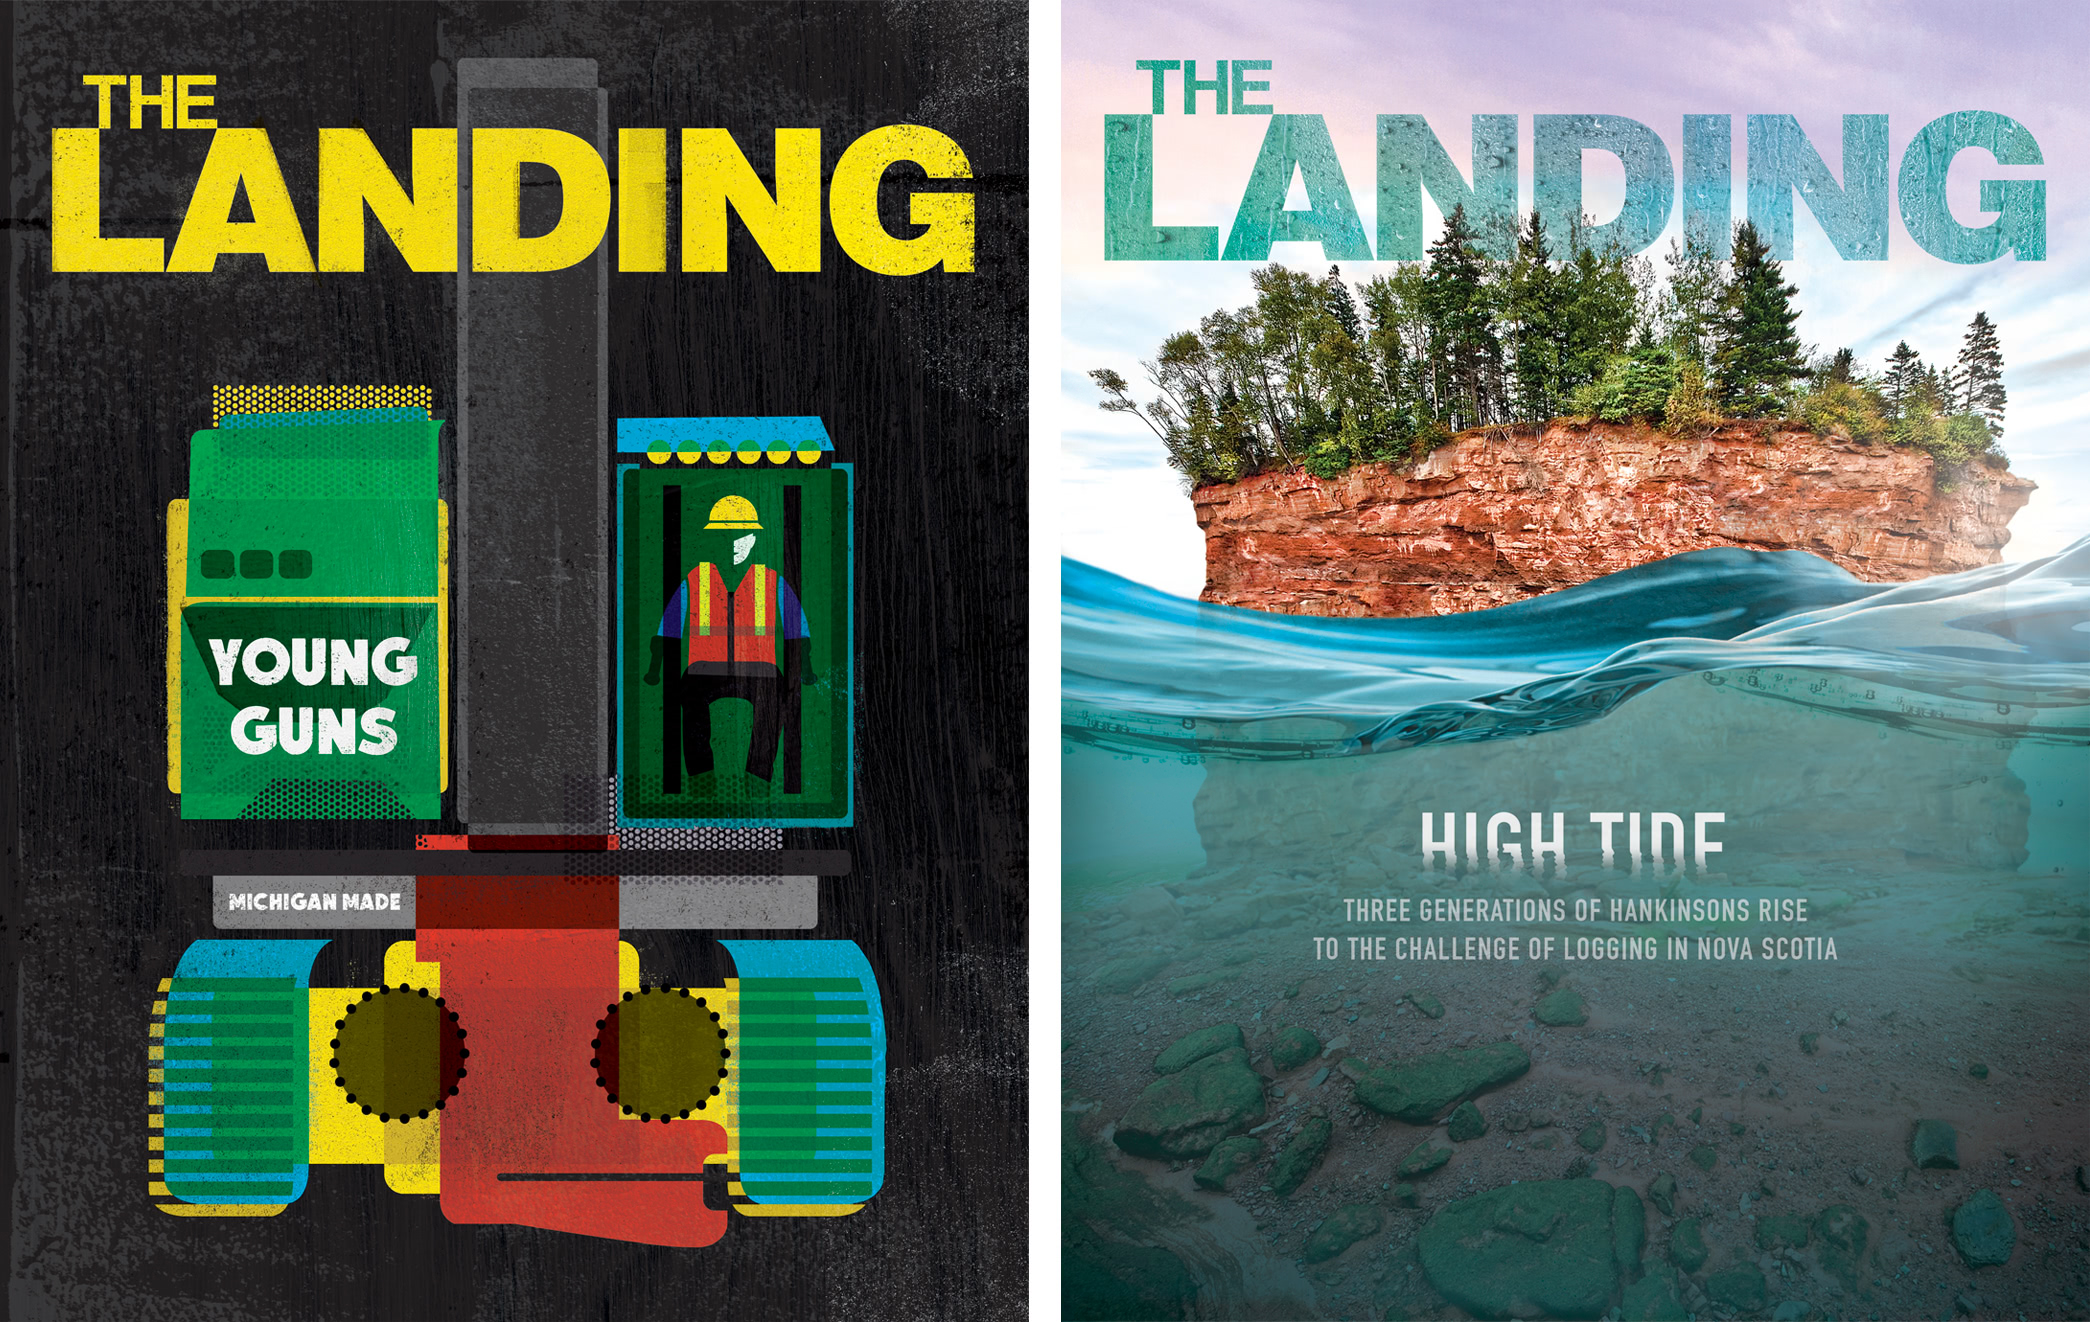 Past covers of The Landing magazine